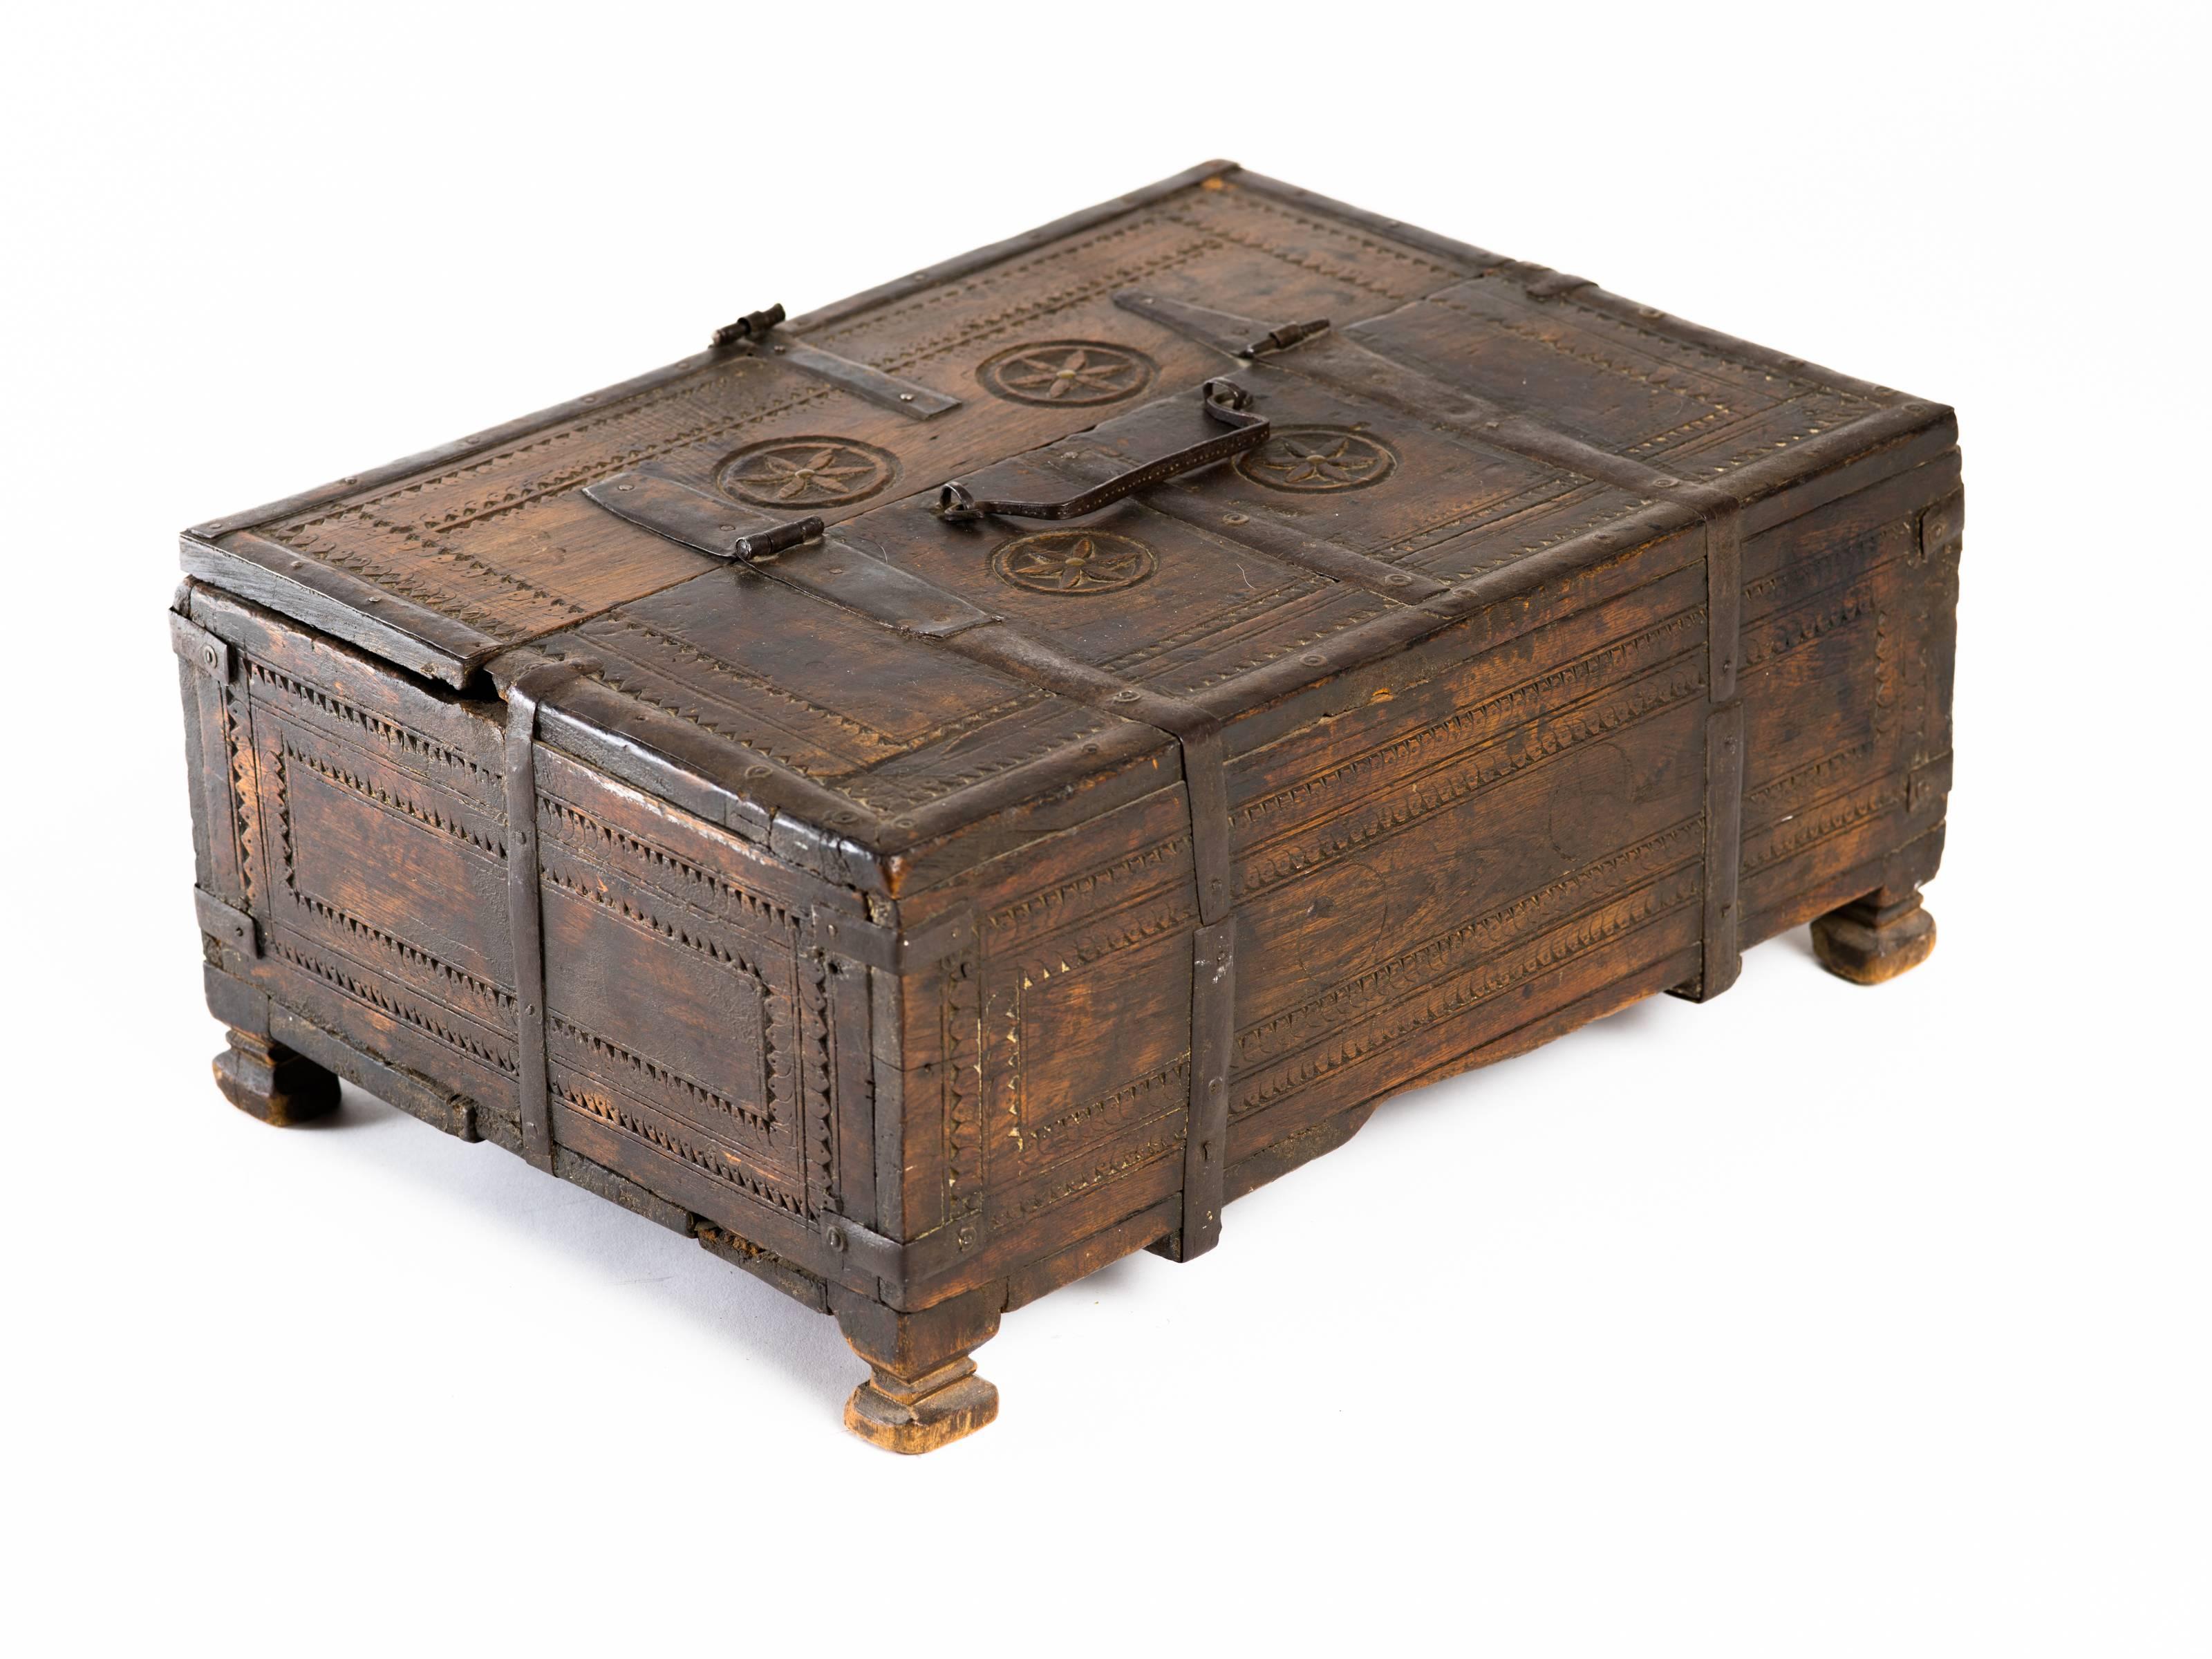 Hand-carved wooden Indian tribal storage chest box with hand-wrought iron hinges and straps, and handle. Early 20th century, Northern India.